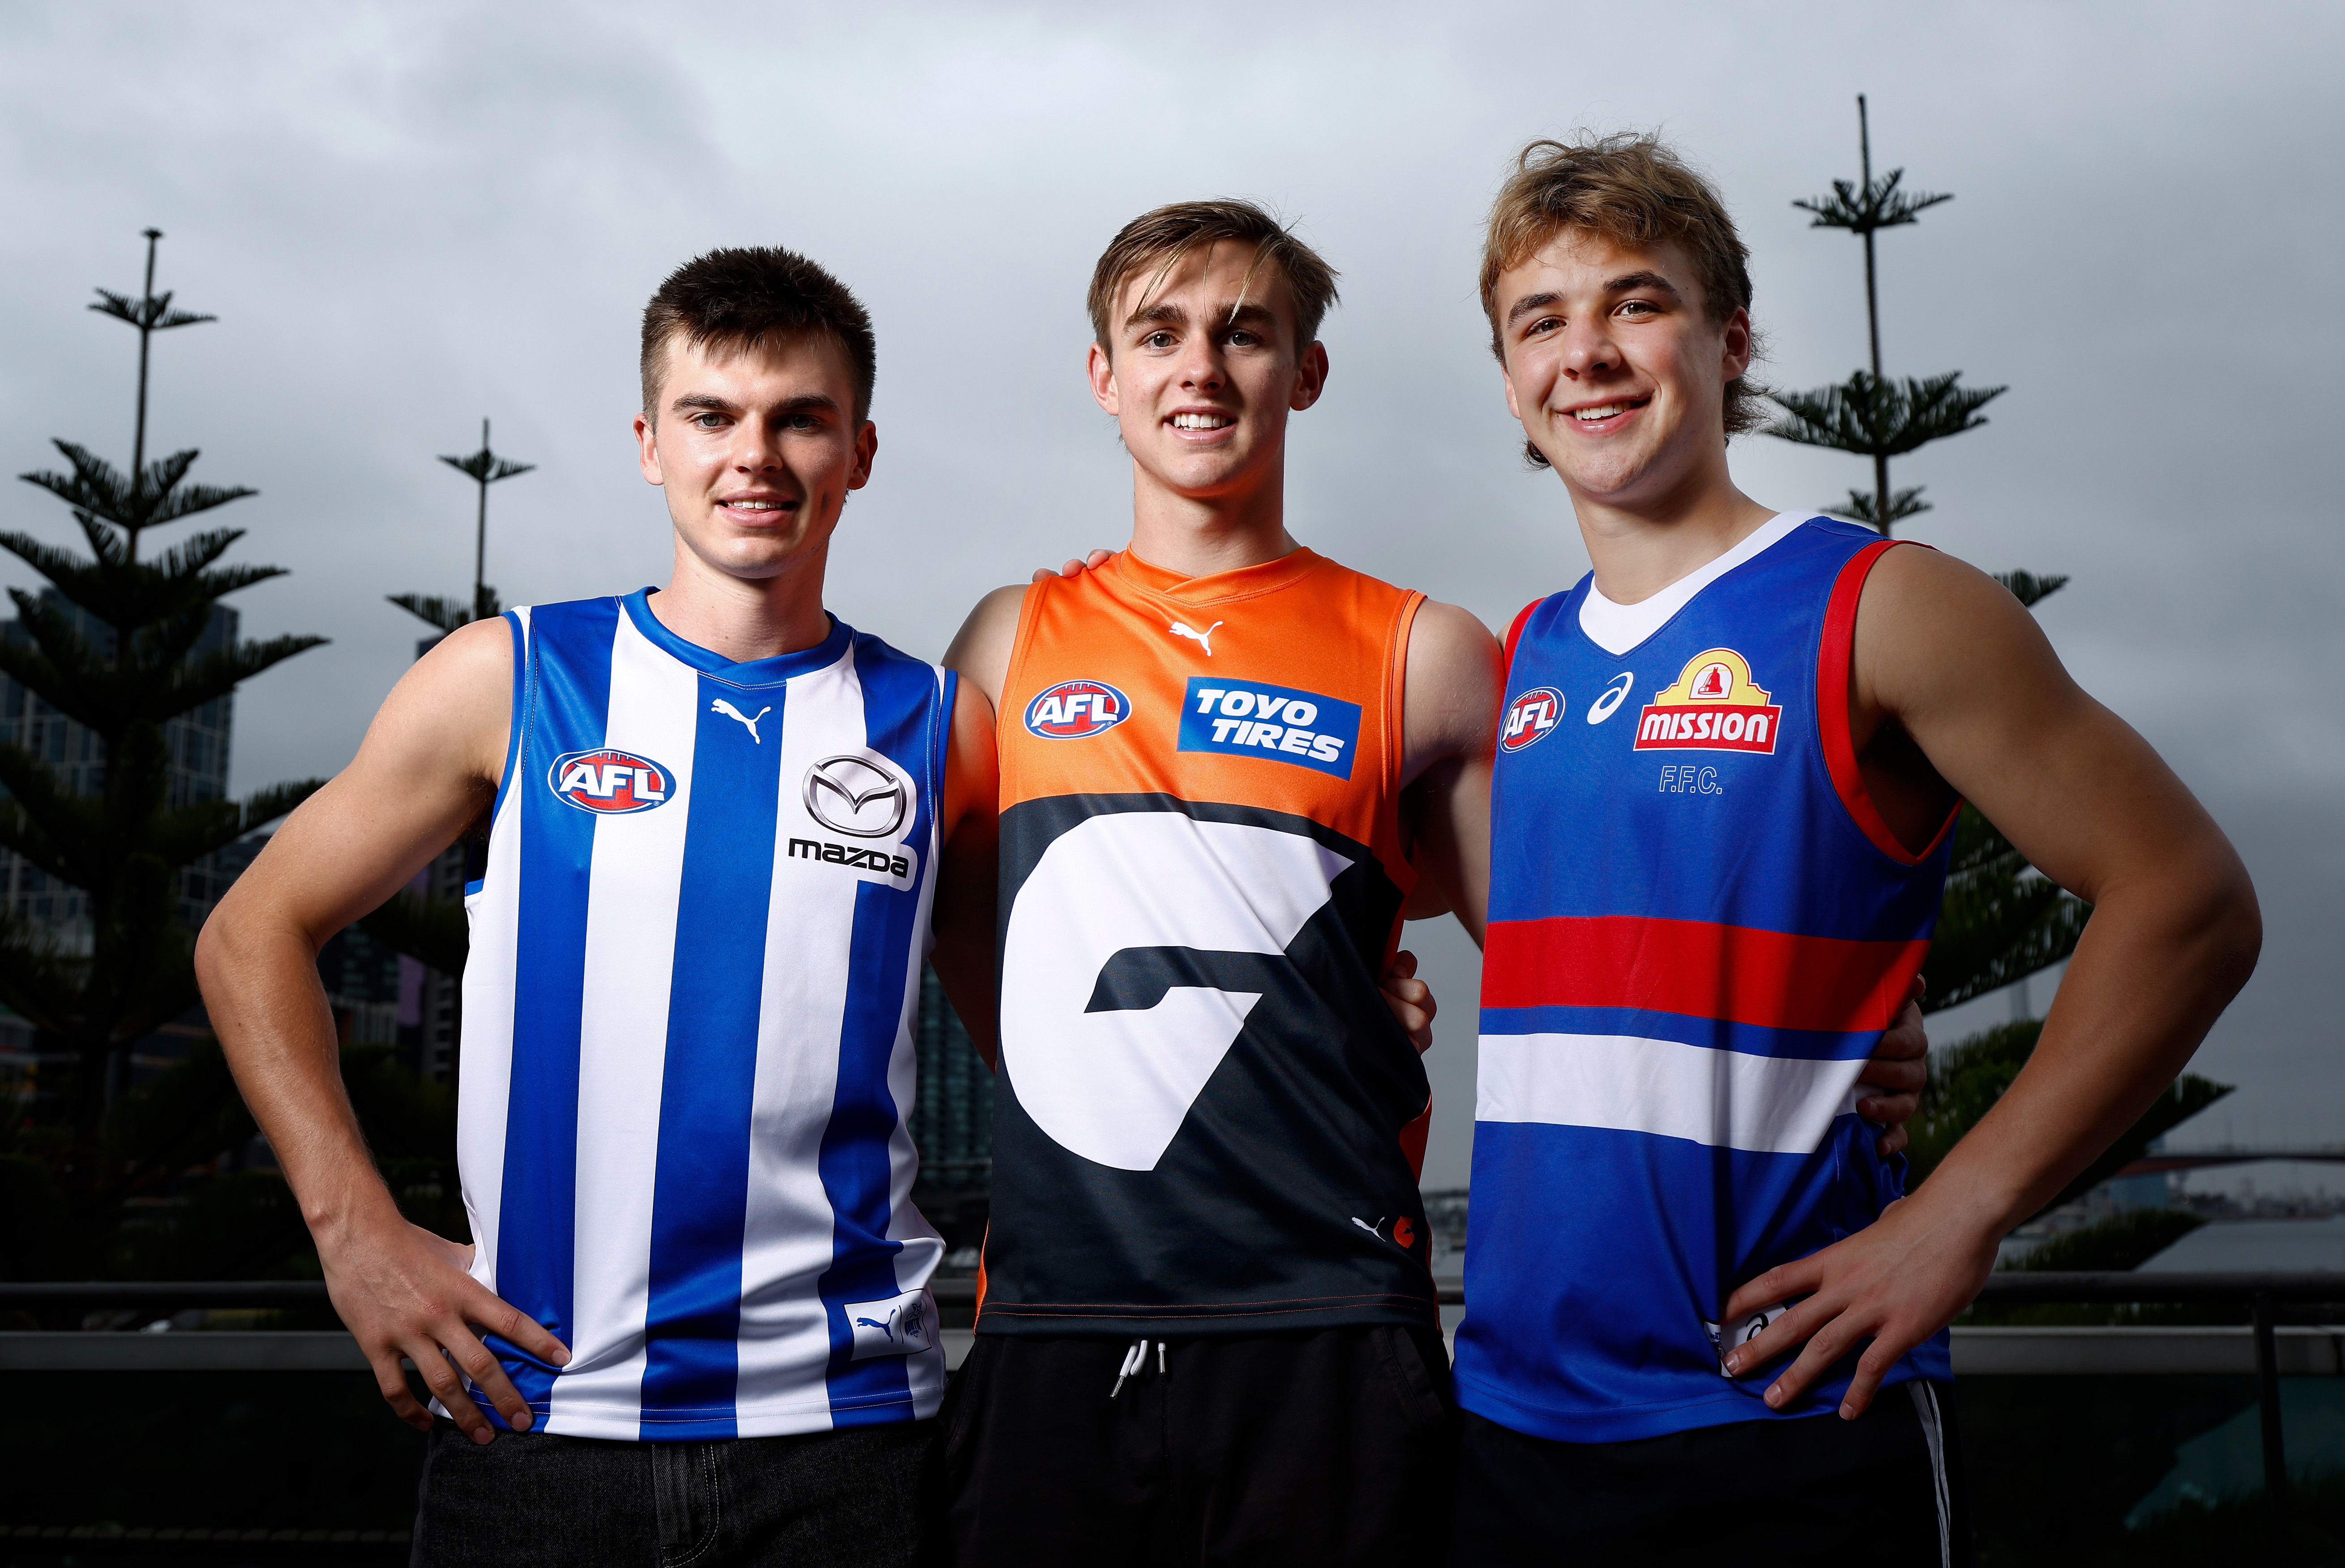 MELBOURNE, AUSTRALIA - NOVEMBER 21: (L-R) Colby McKercher of the Kangaroos, James Leake of the Giants and Ryley Sanders of the Giants pose during the AFL Draft Media Opportunity at Marvel Stadium on November 21, 2023 in Melbourne, Australia. (Photo by Michael Willson/AFL Photos via Getty Images)